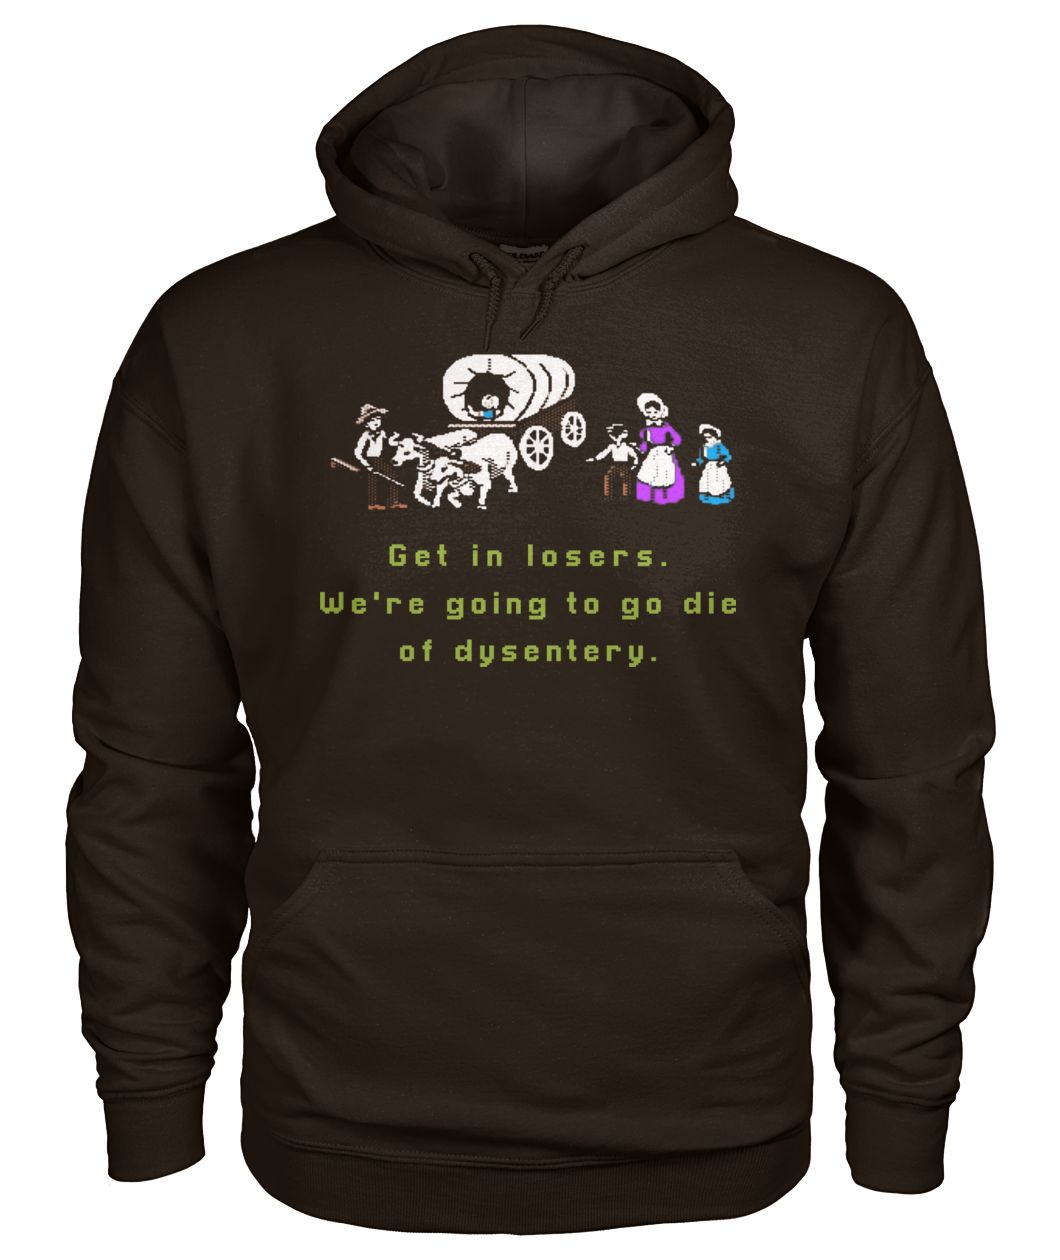 Get in losers we are going to go die of dysentery gildan hoodie